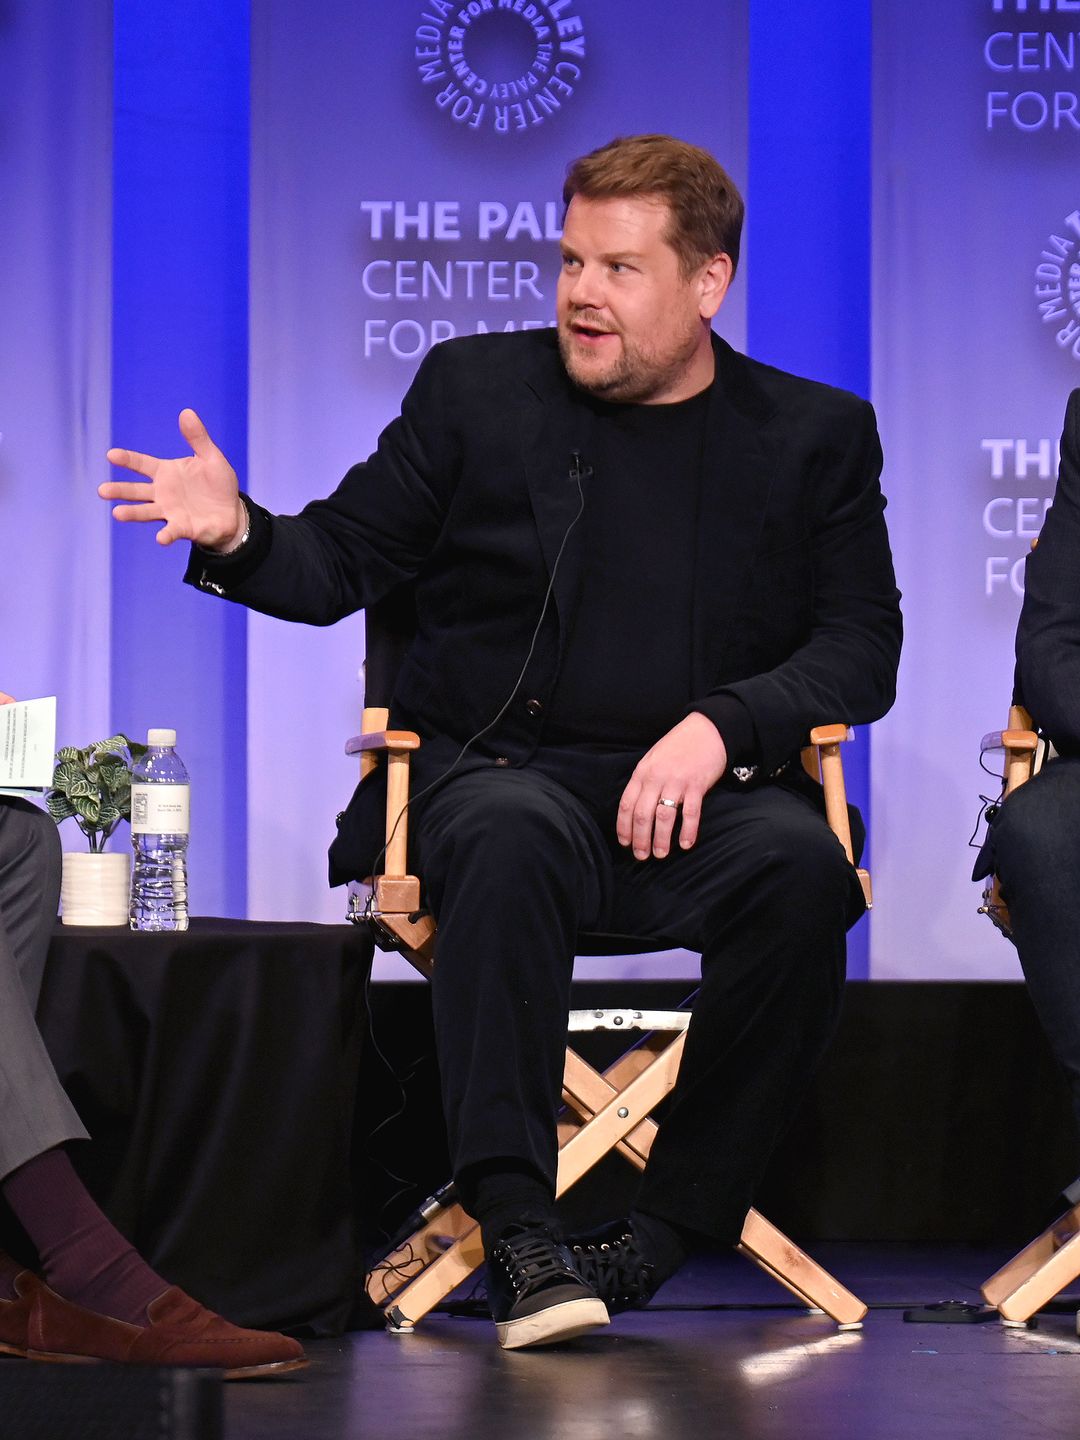 James Corden discusses The Late Late Show at PaleyFest